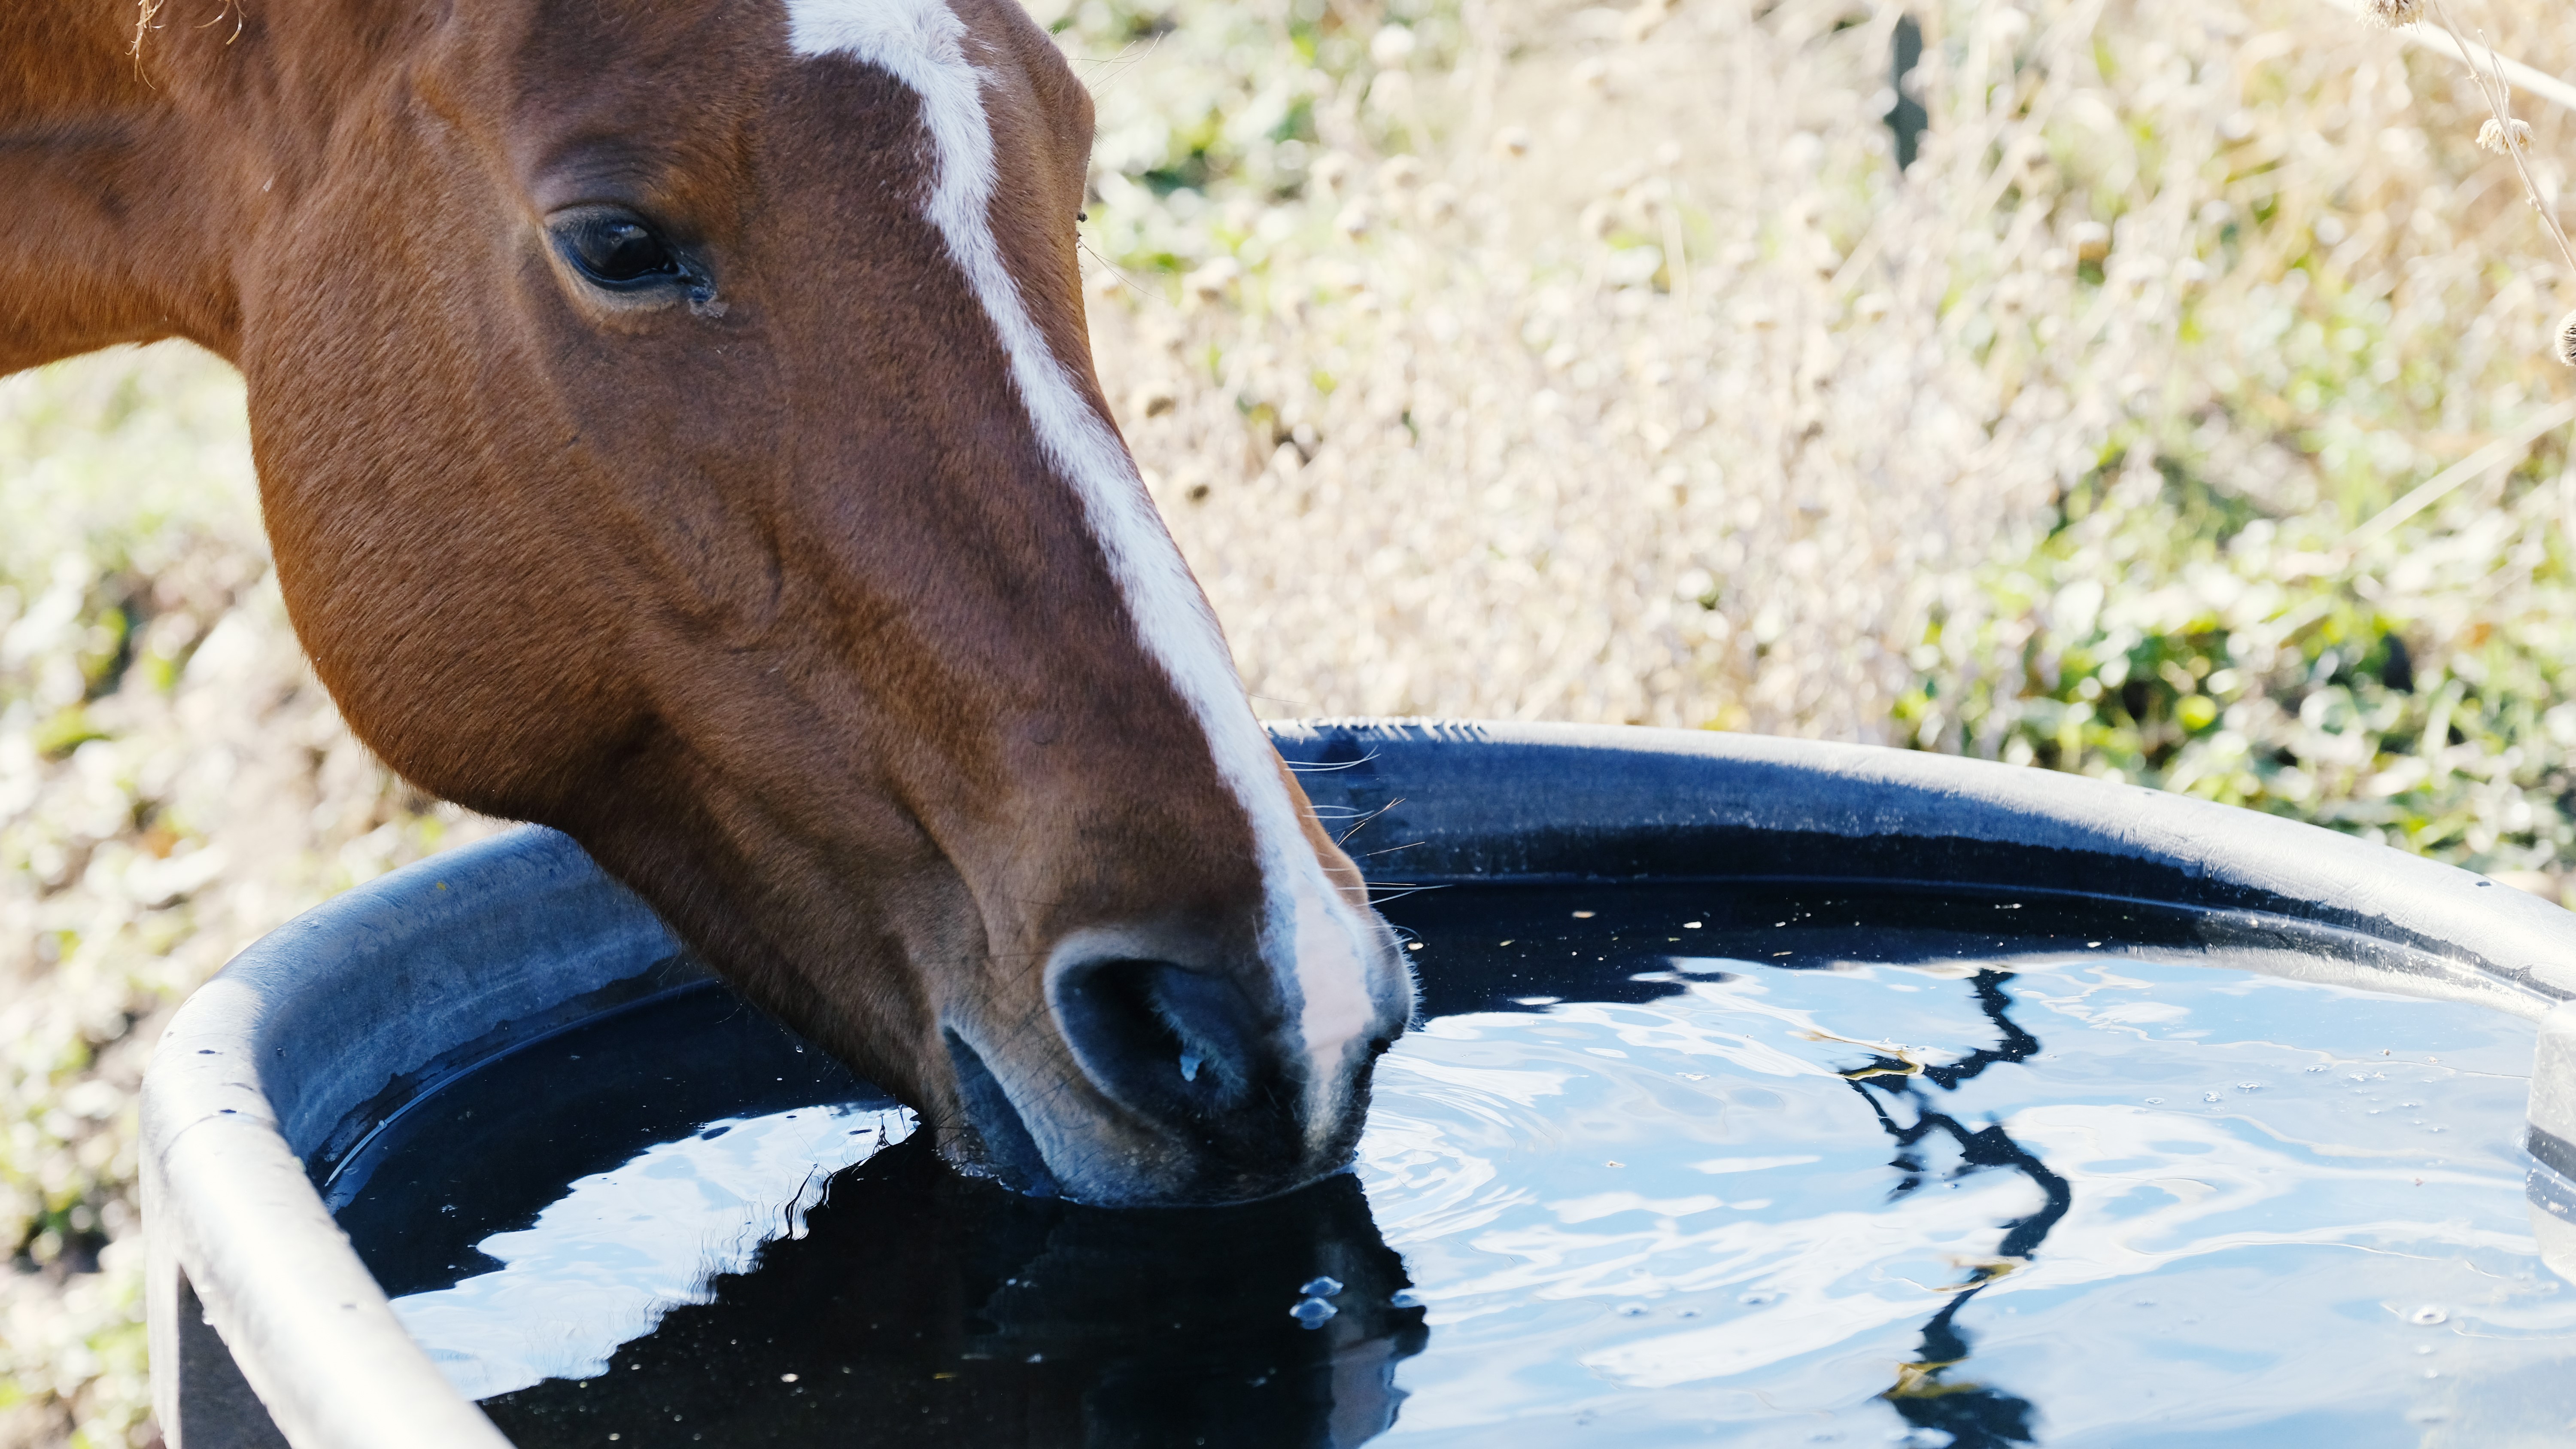 How Taylor Got Her Horse to Drink More Water | A Redmond Story